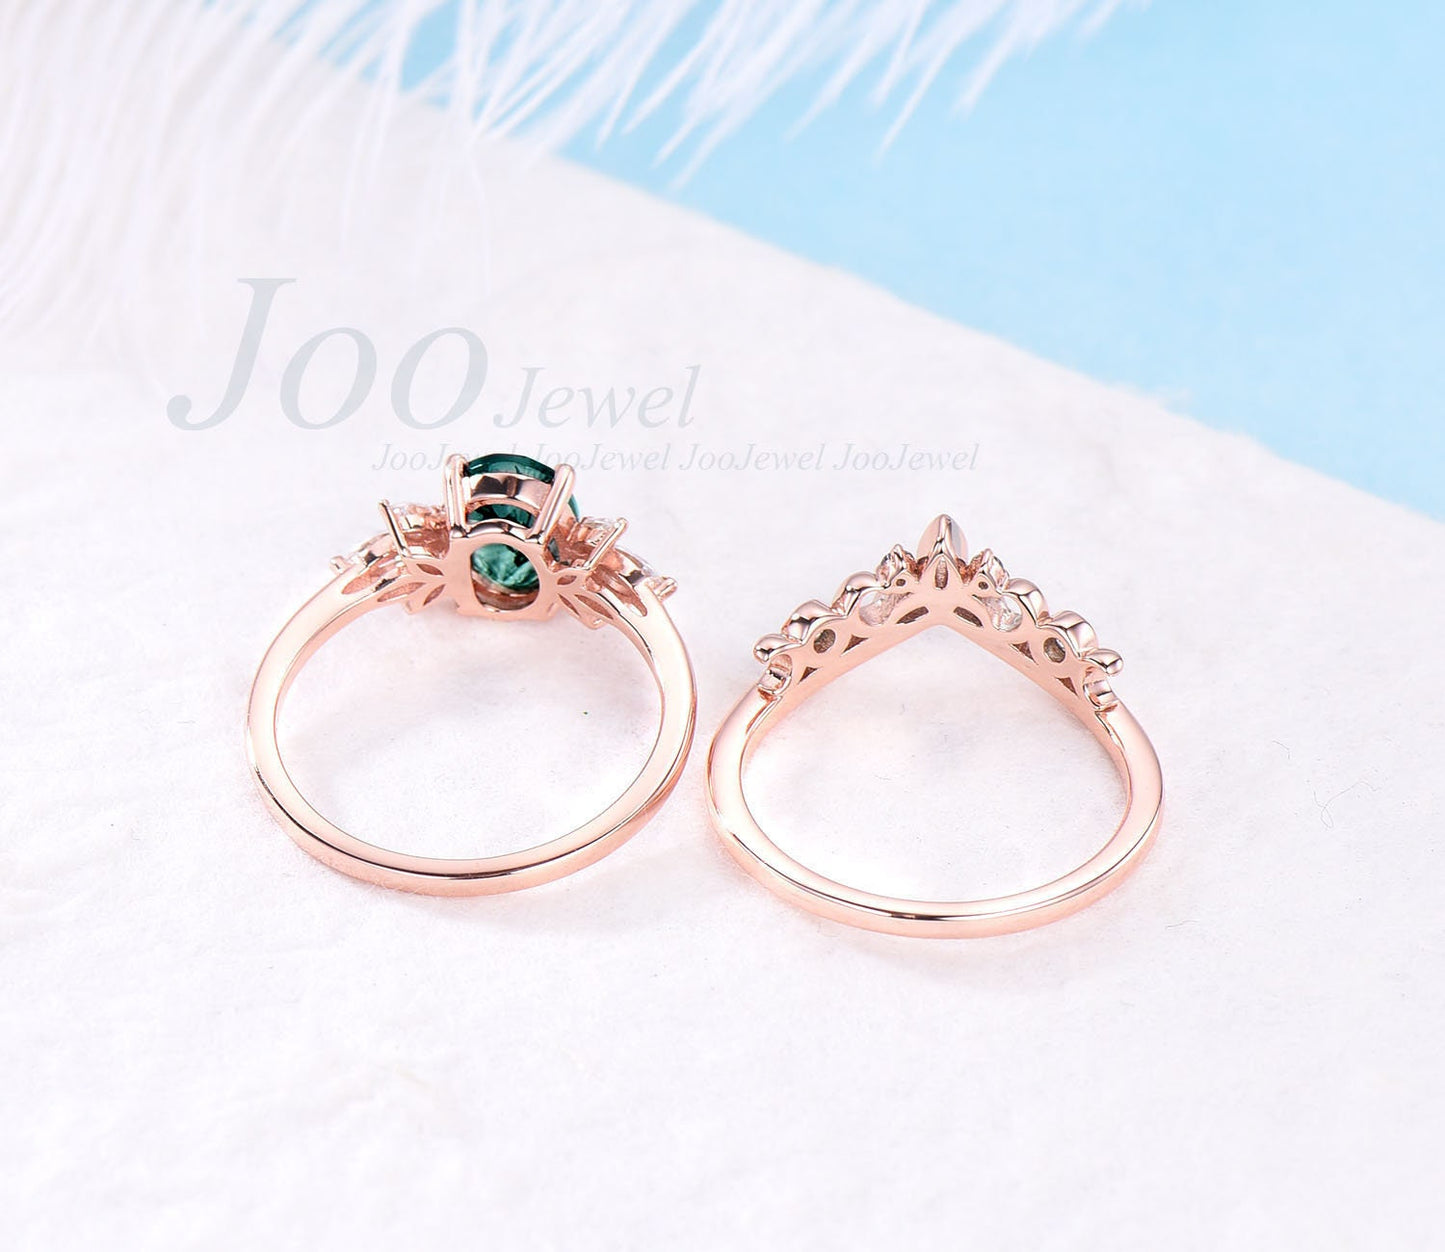 Oval emerald wedding ring set vintage emerald engagement ring set art deco rose gold silver ring Norse viking ring promise ring for women